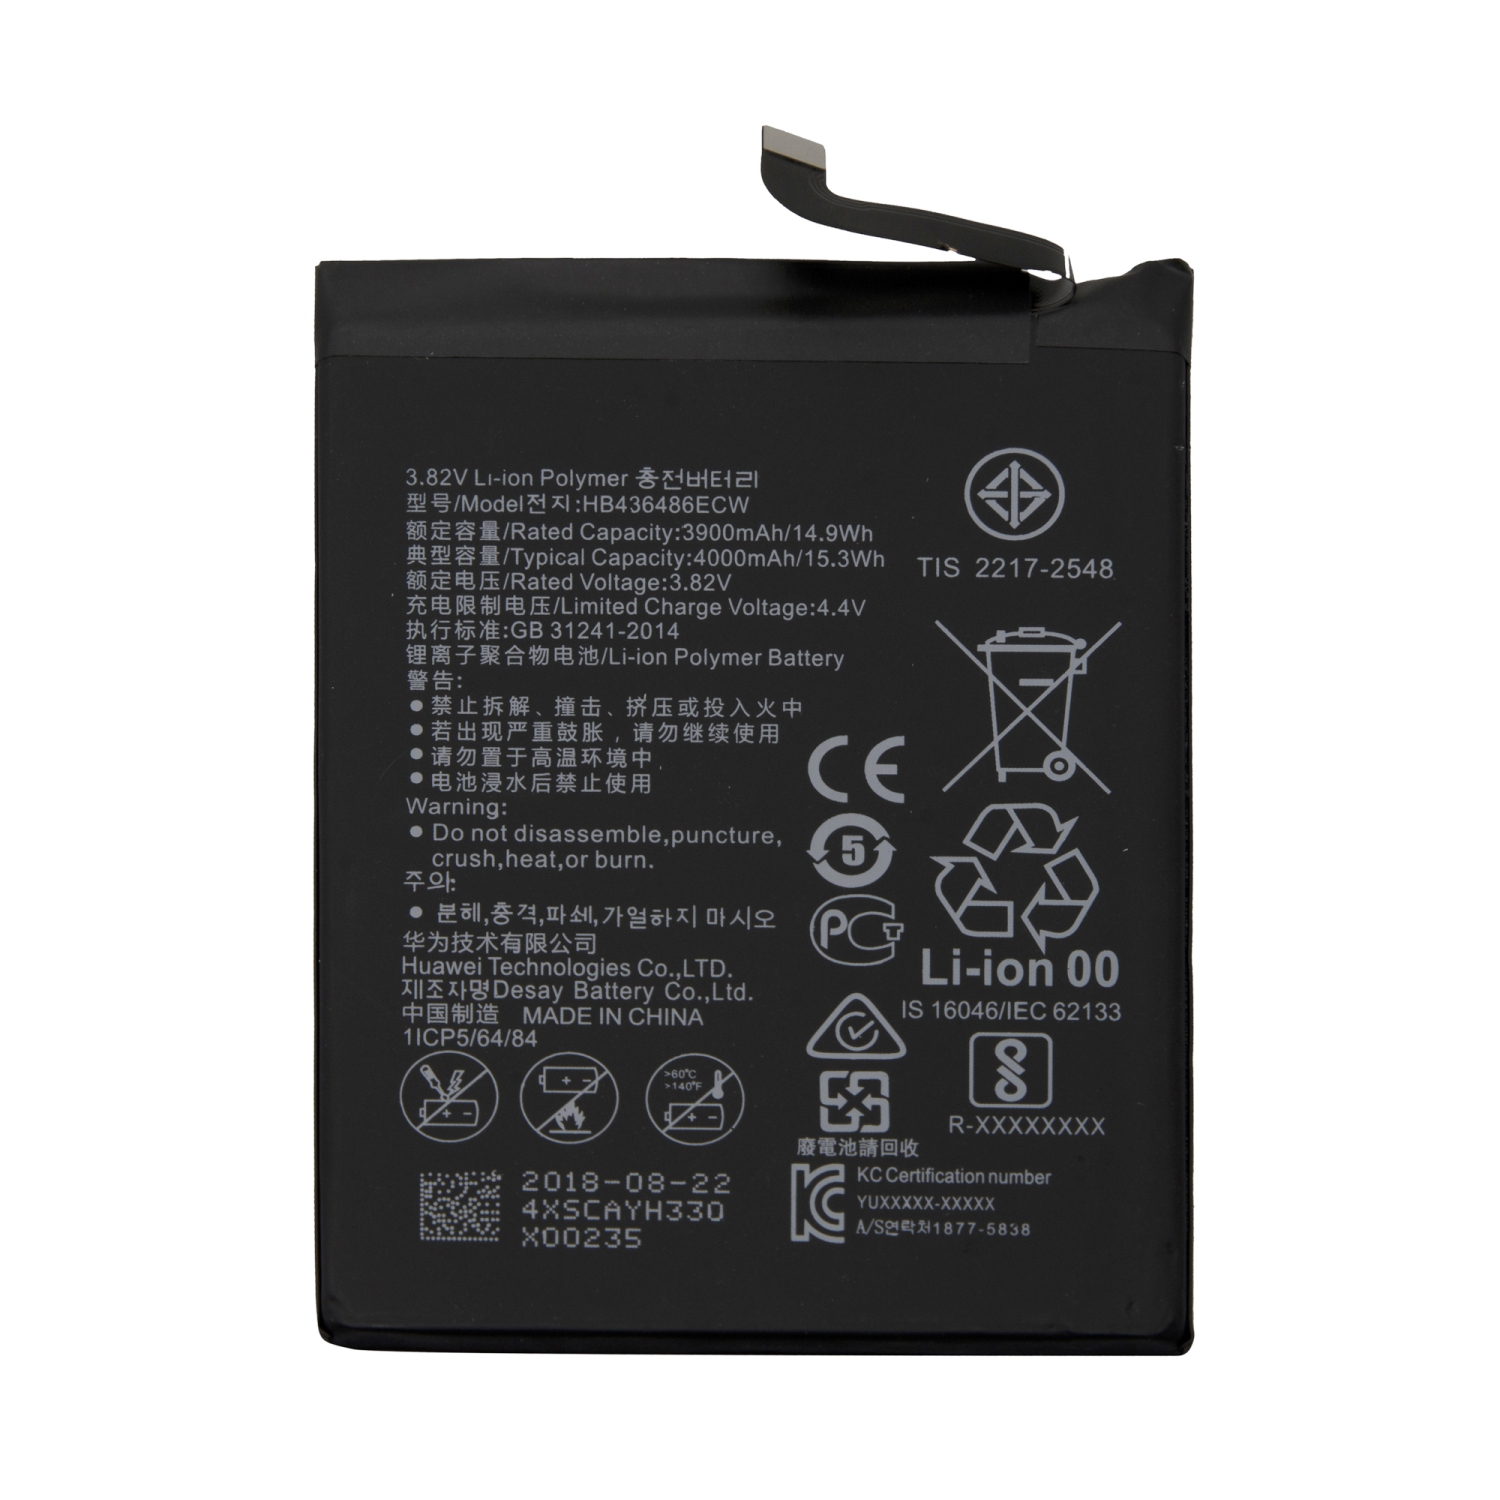 Replacement Battery 4000mAh HB436486ECW For Huawei Mate 10 / Mate 10 Pro / P20 Pro / Mate 20